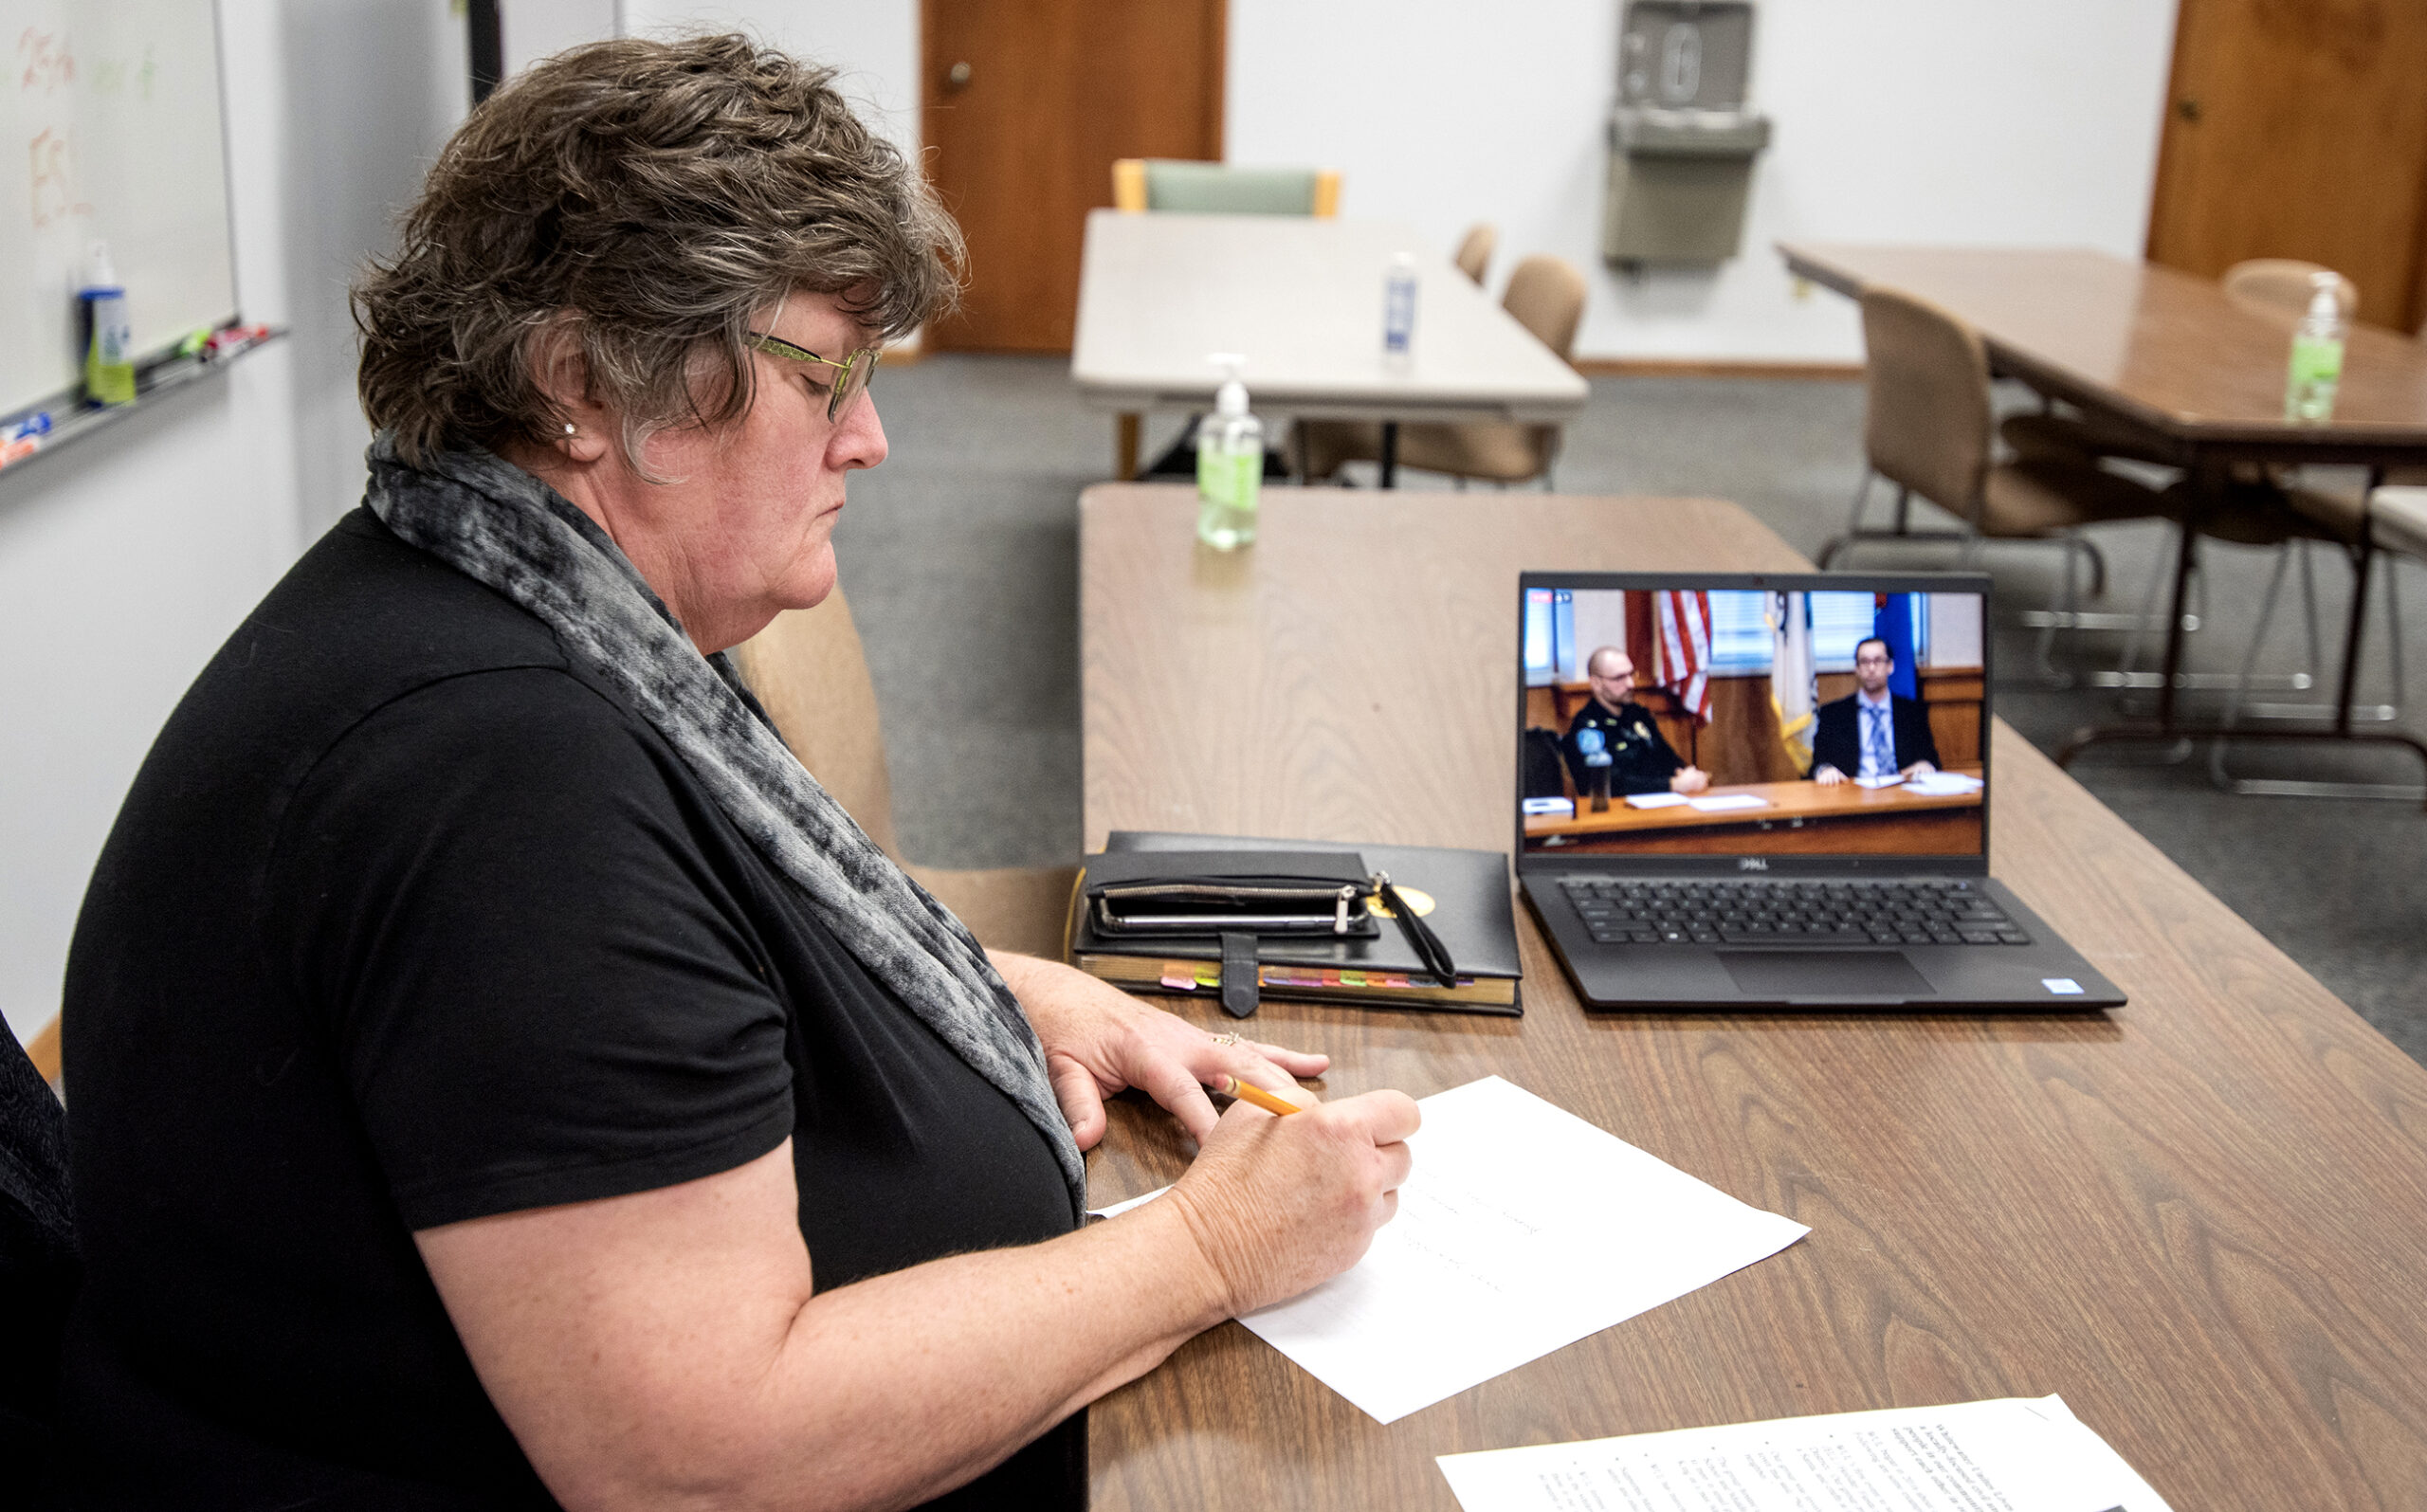 A woman takes notes as two men speak on a livestream shown on a laptop.